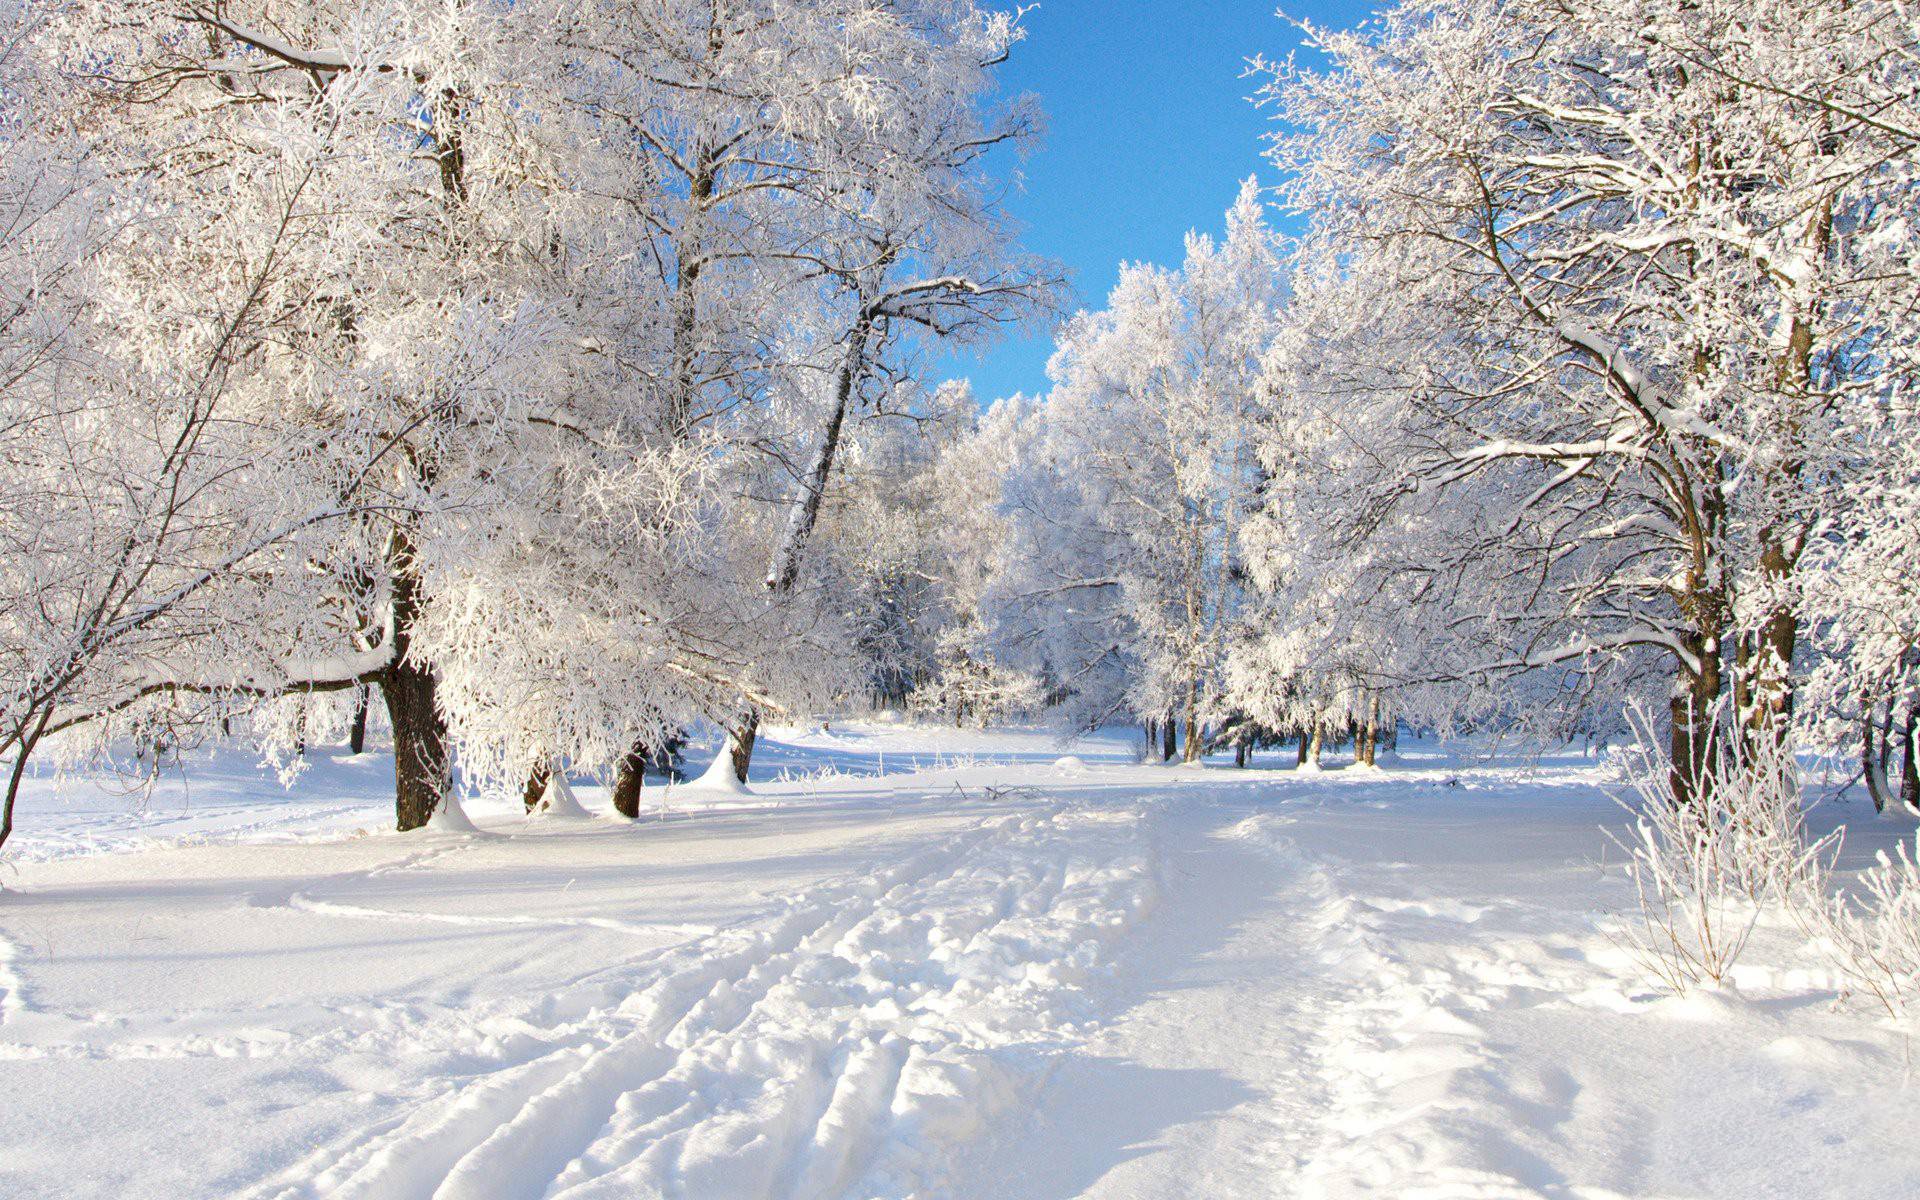 winter background / Wallpaper Winter 383 high quality Background